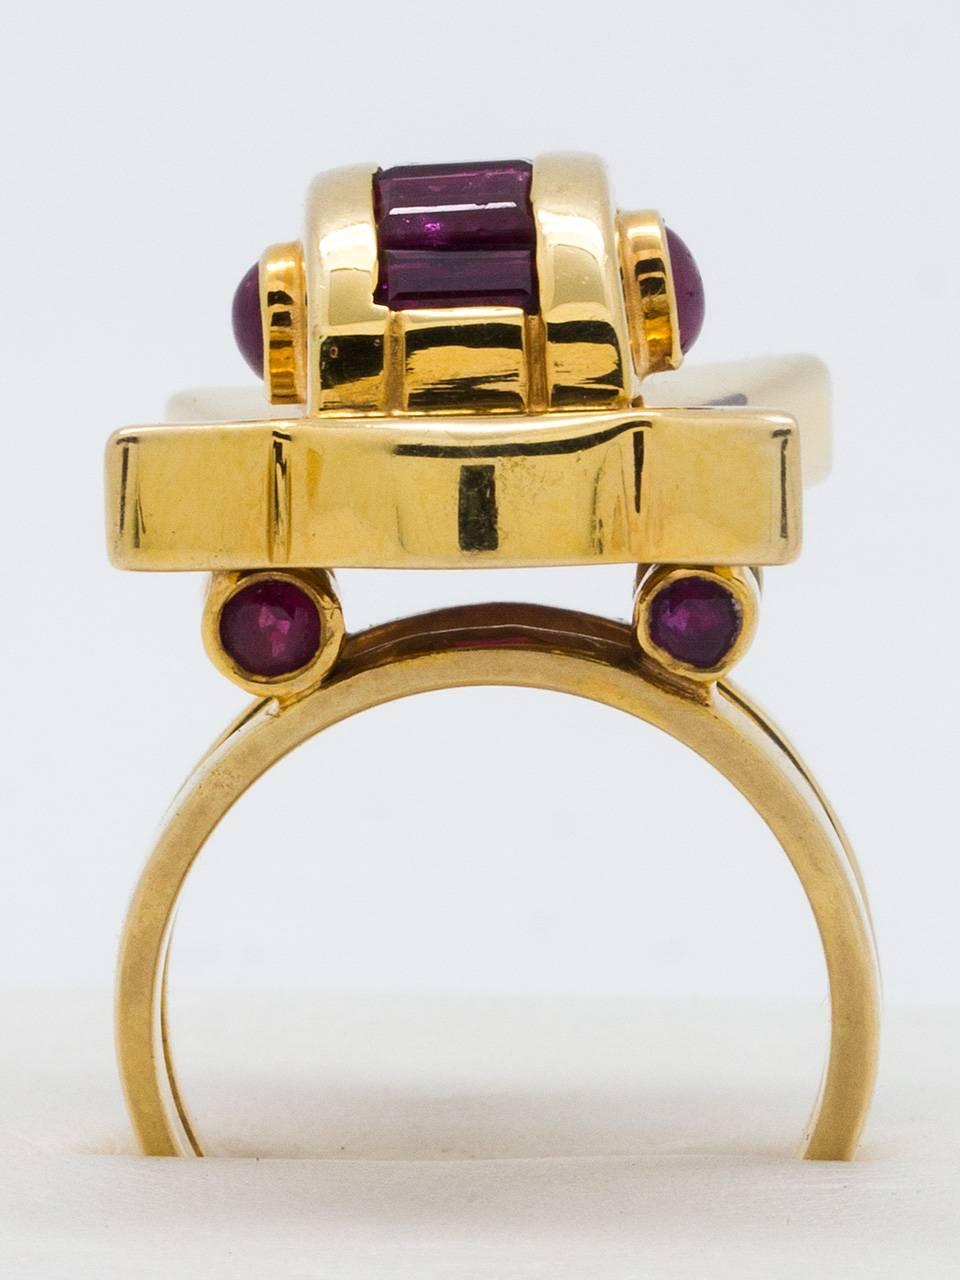 Retro style 14K yellow gold ring circa 1940’s. Great architectural style featuring bow shaped design topped with dome shaped design with calibrate ruby color stones. Accented with additional cabochon ruby colored stones. Stones of unknown origin.